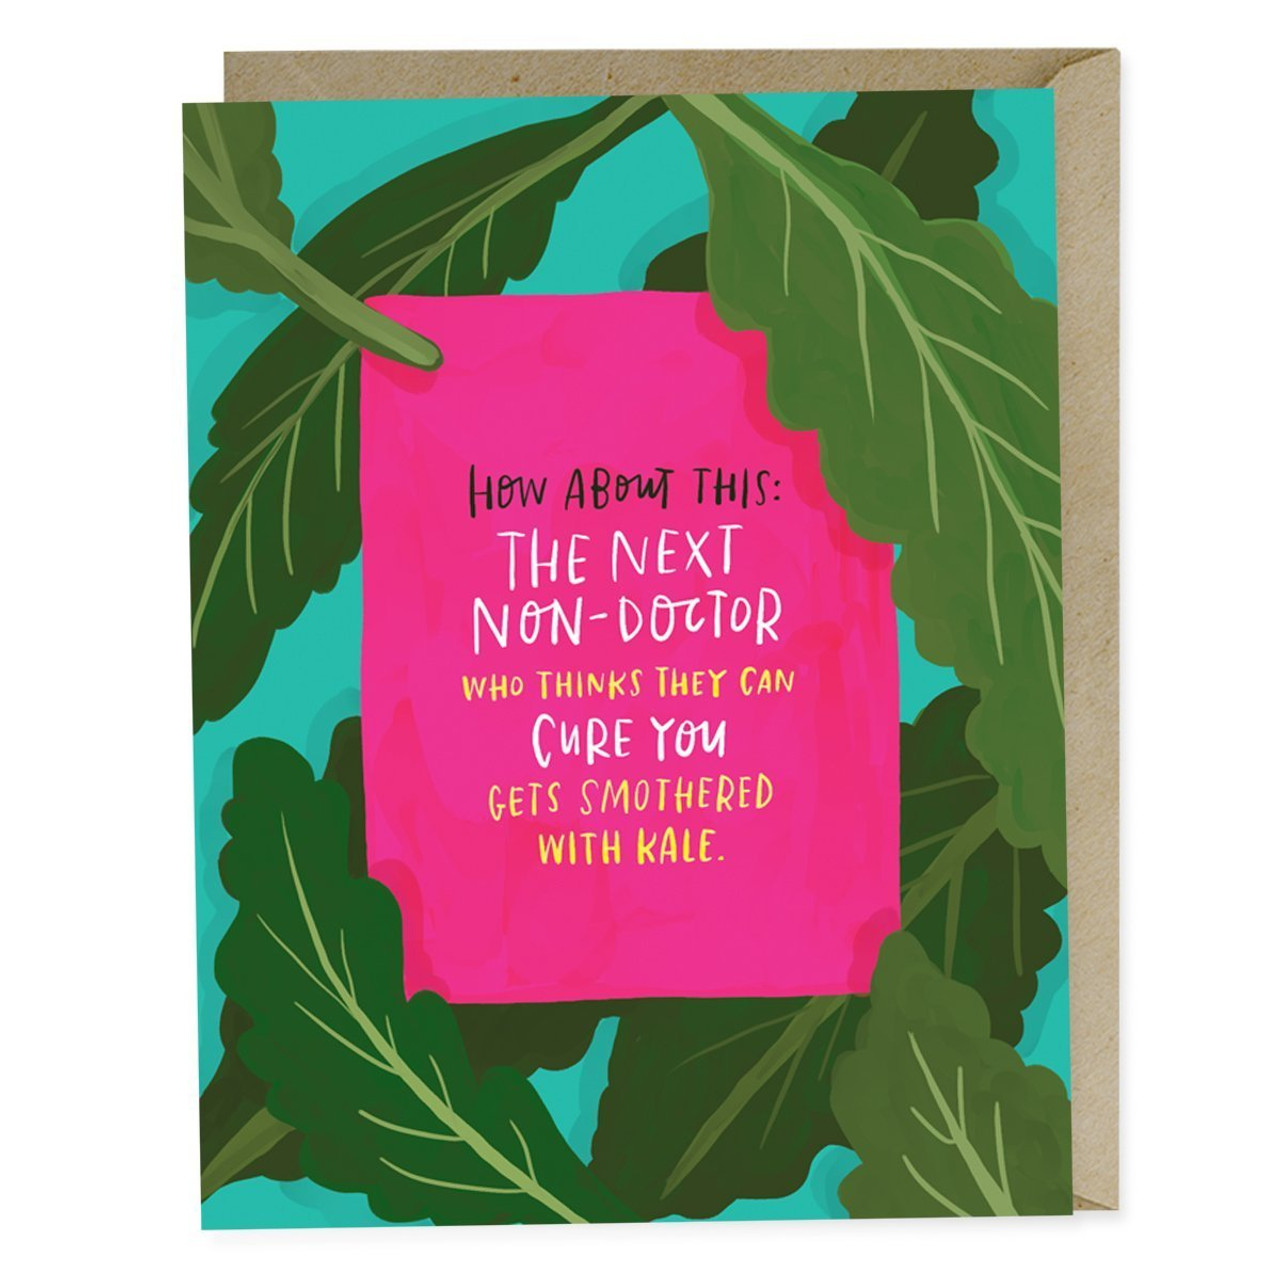 Smothered with Kale Empathy Card by Emily McDowell